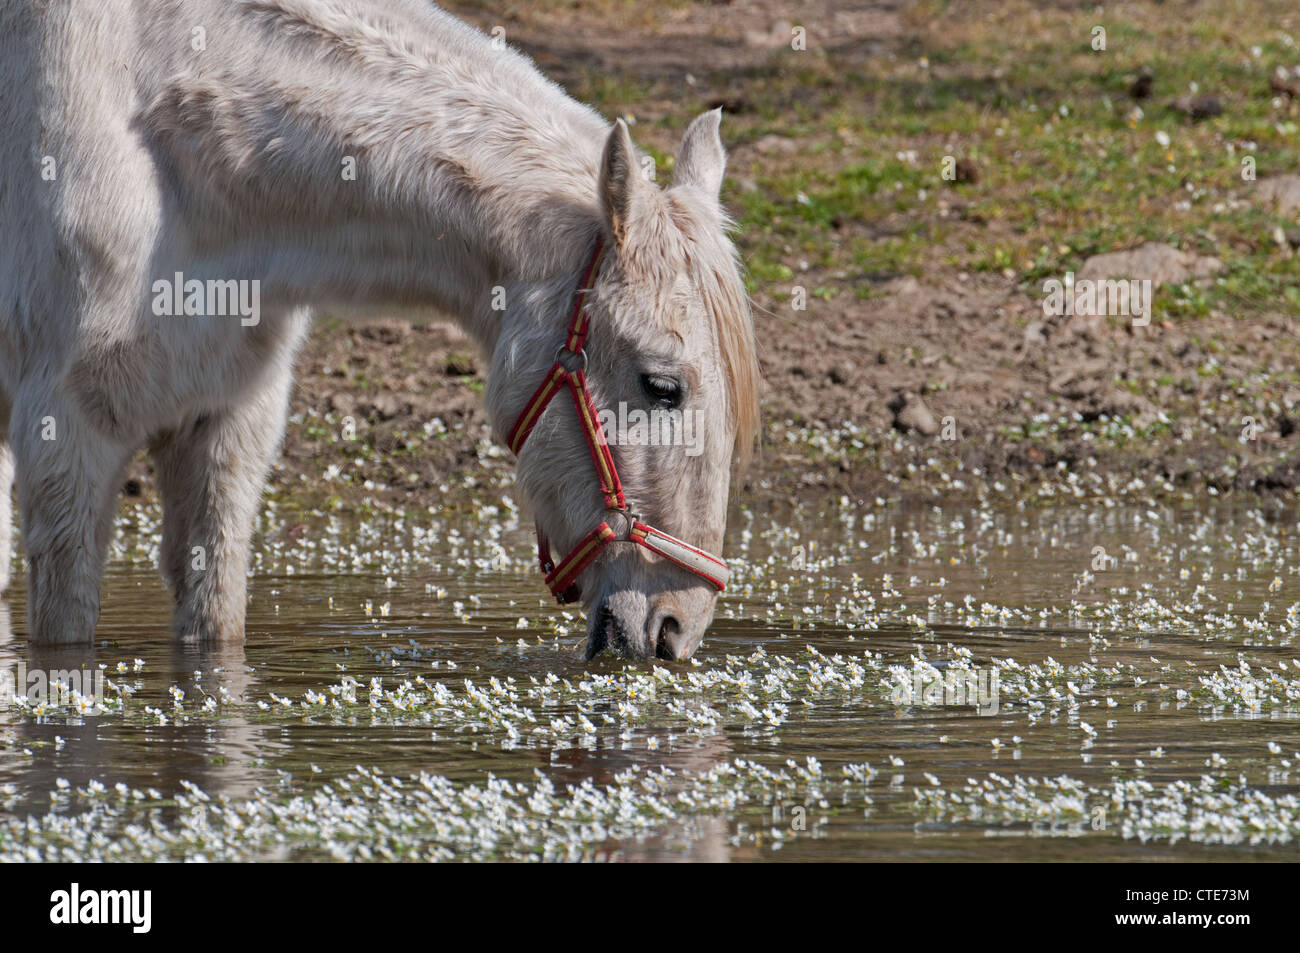 A HORSE DRINKING WATER FROM  A LAKE COVERED BY WATER CROWFOOT Ranunculus aquatilis. SPAIN Stock Photo